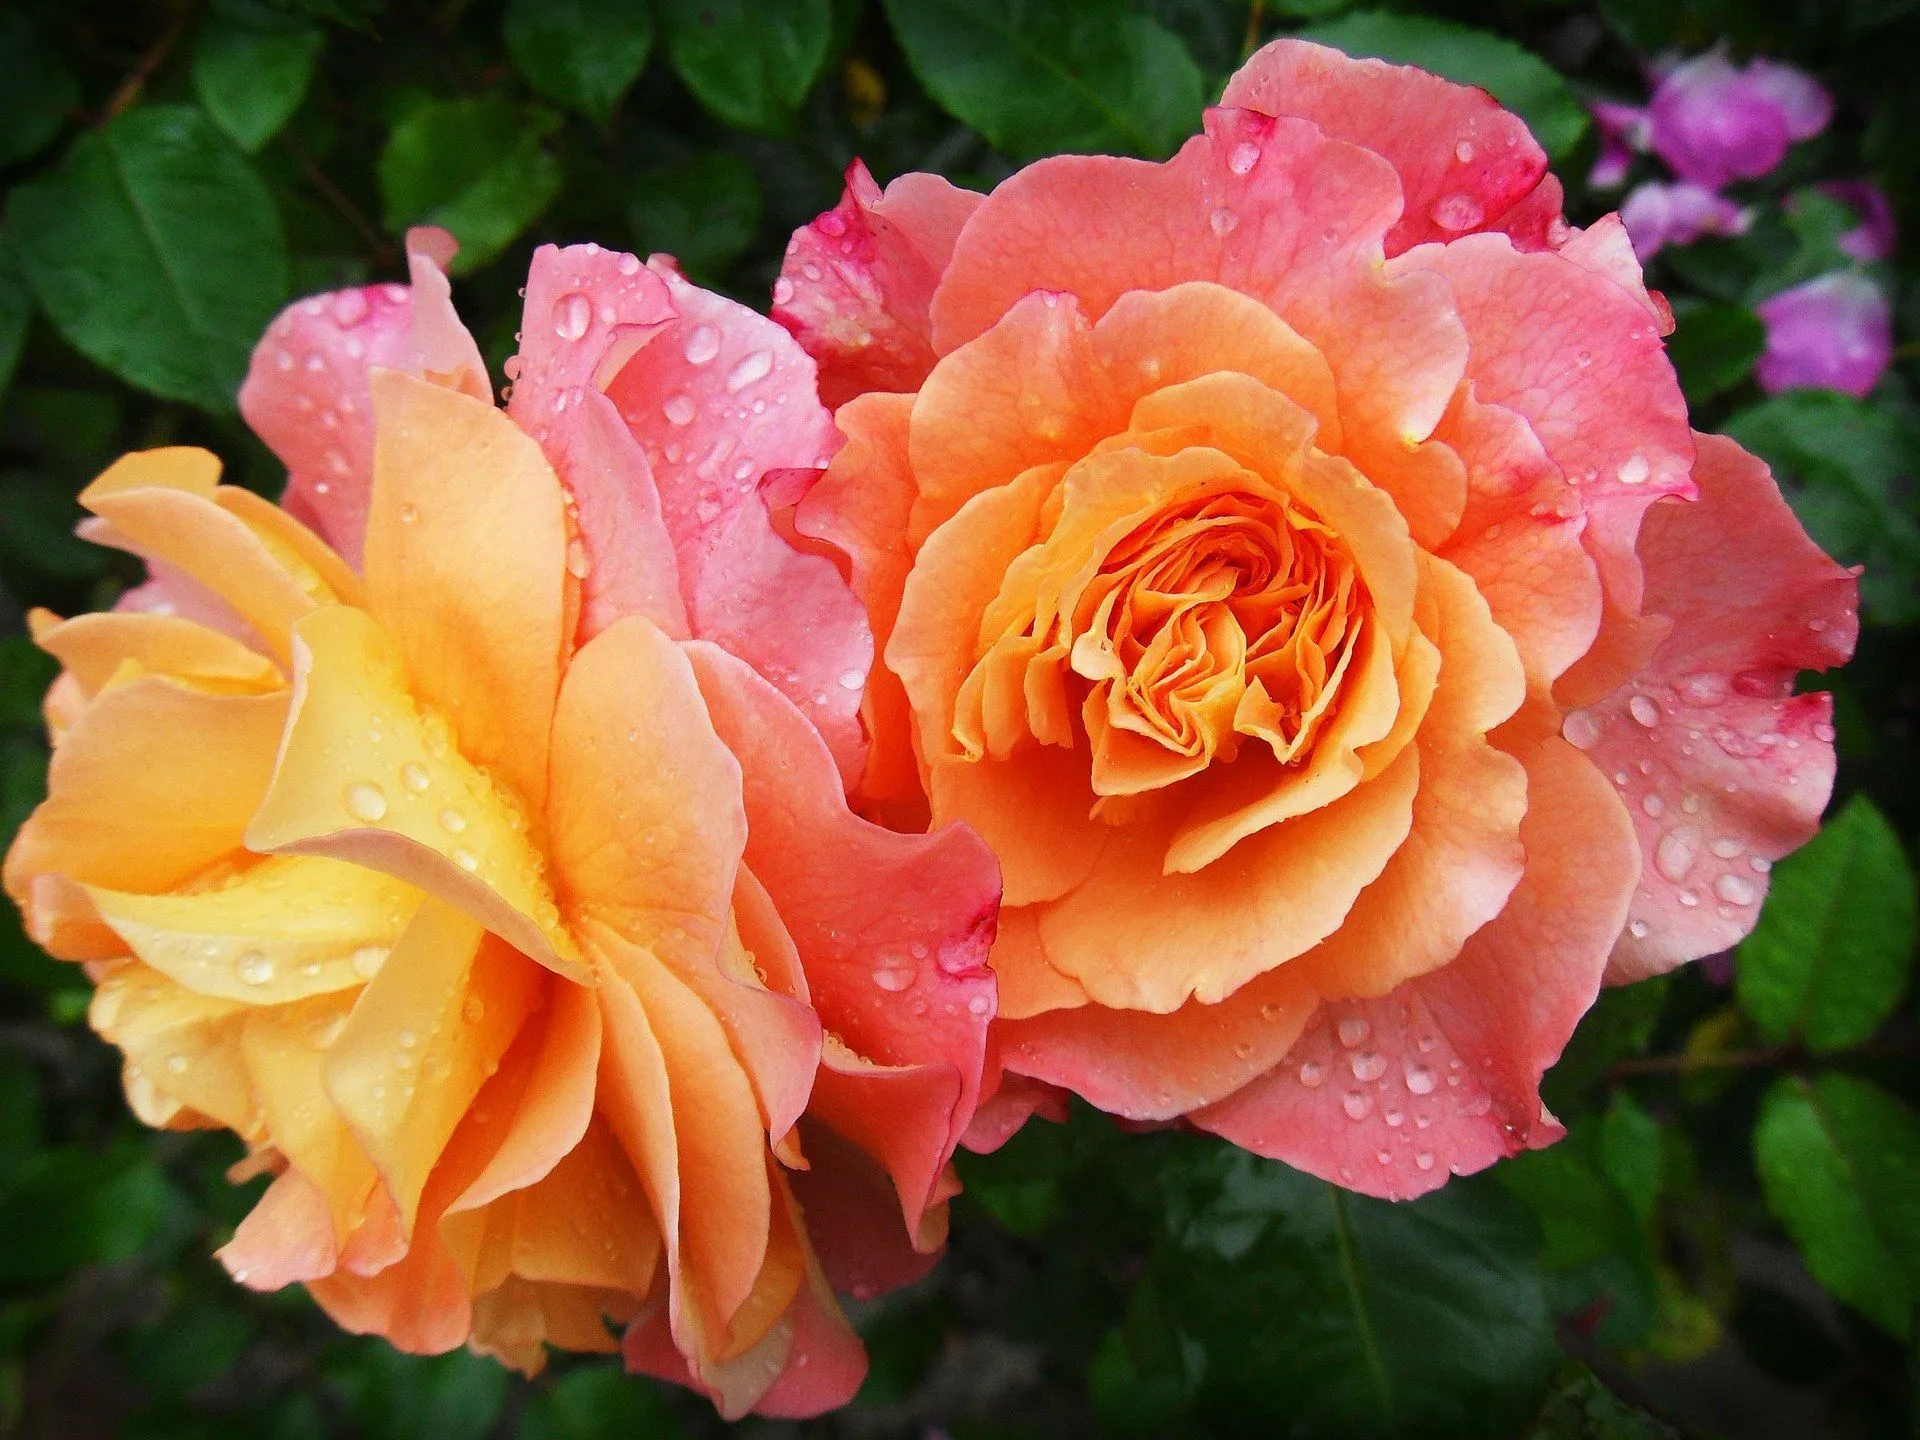 Learn how to grow roses in your garden.